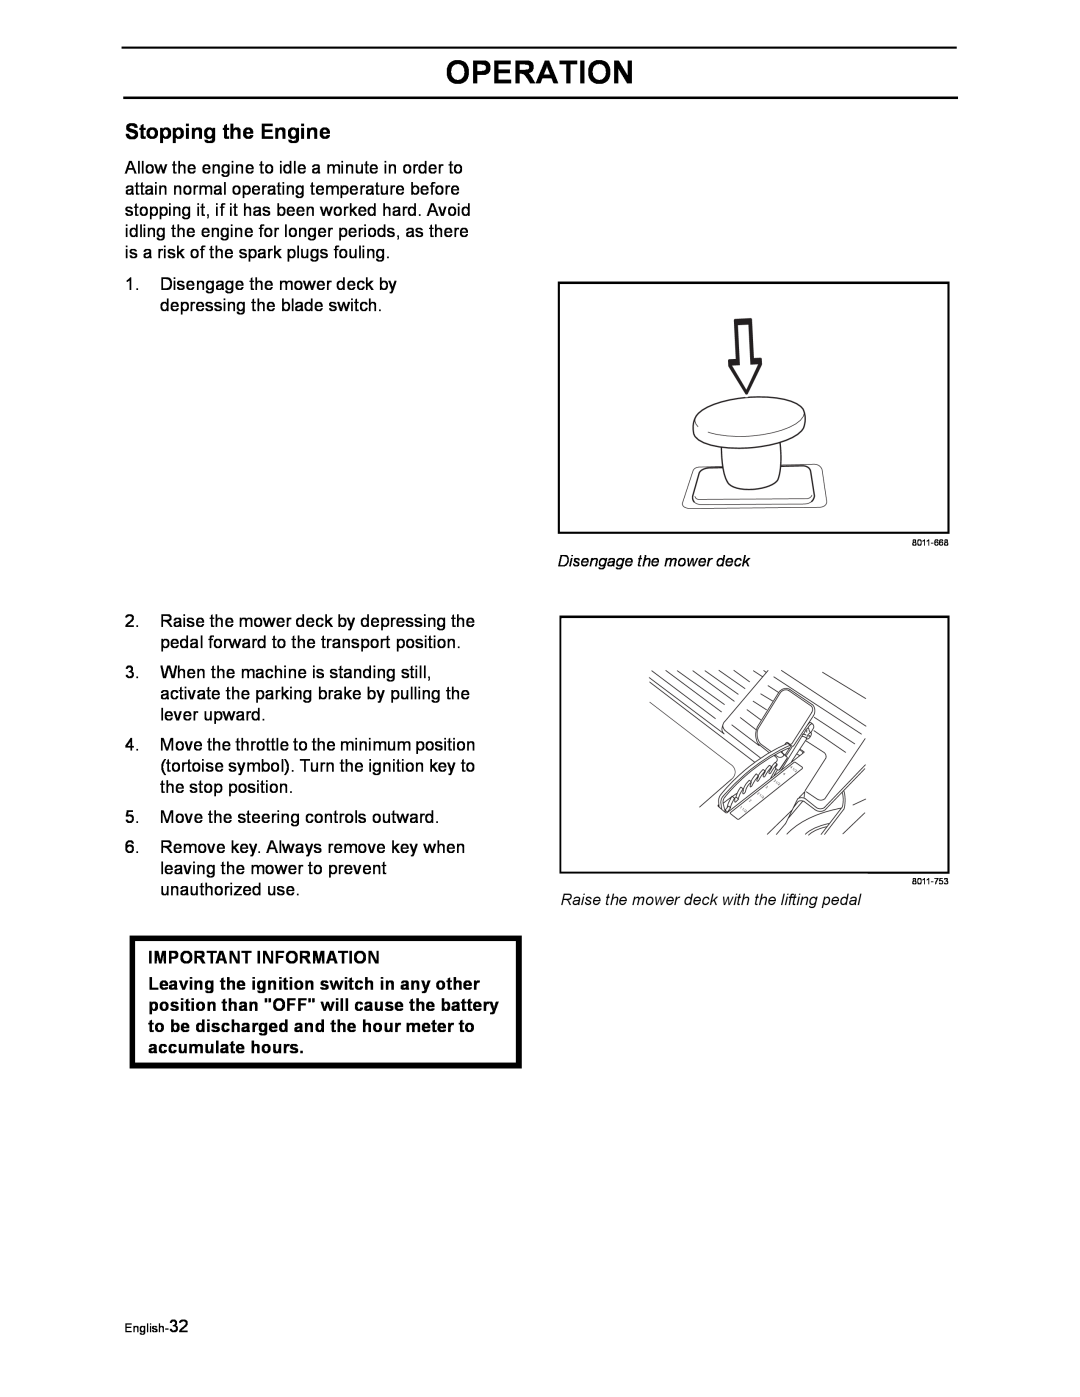 Husqvarna Z4822 manual Stopping the Engine, Operation, Important Information 